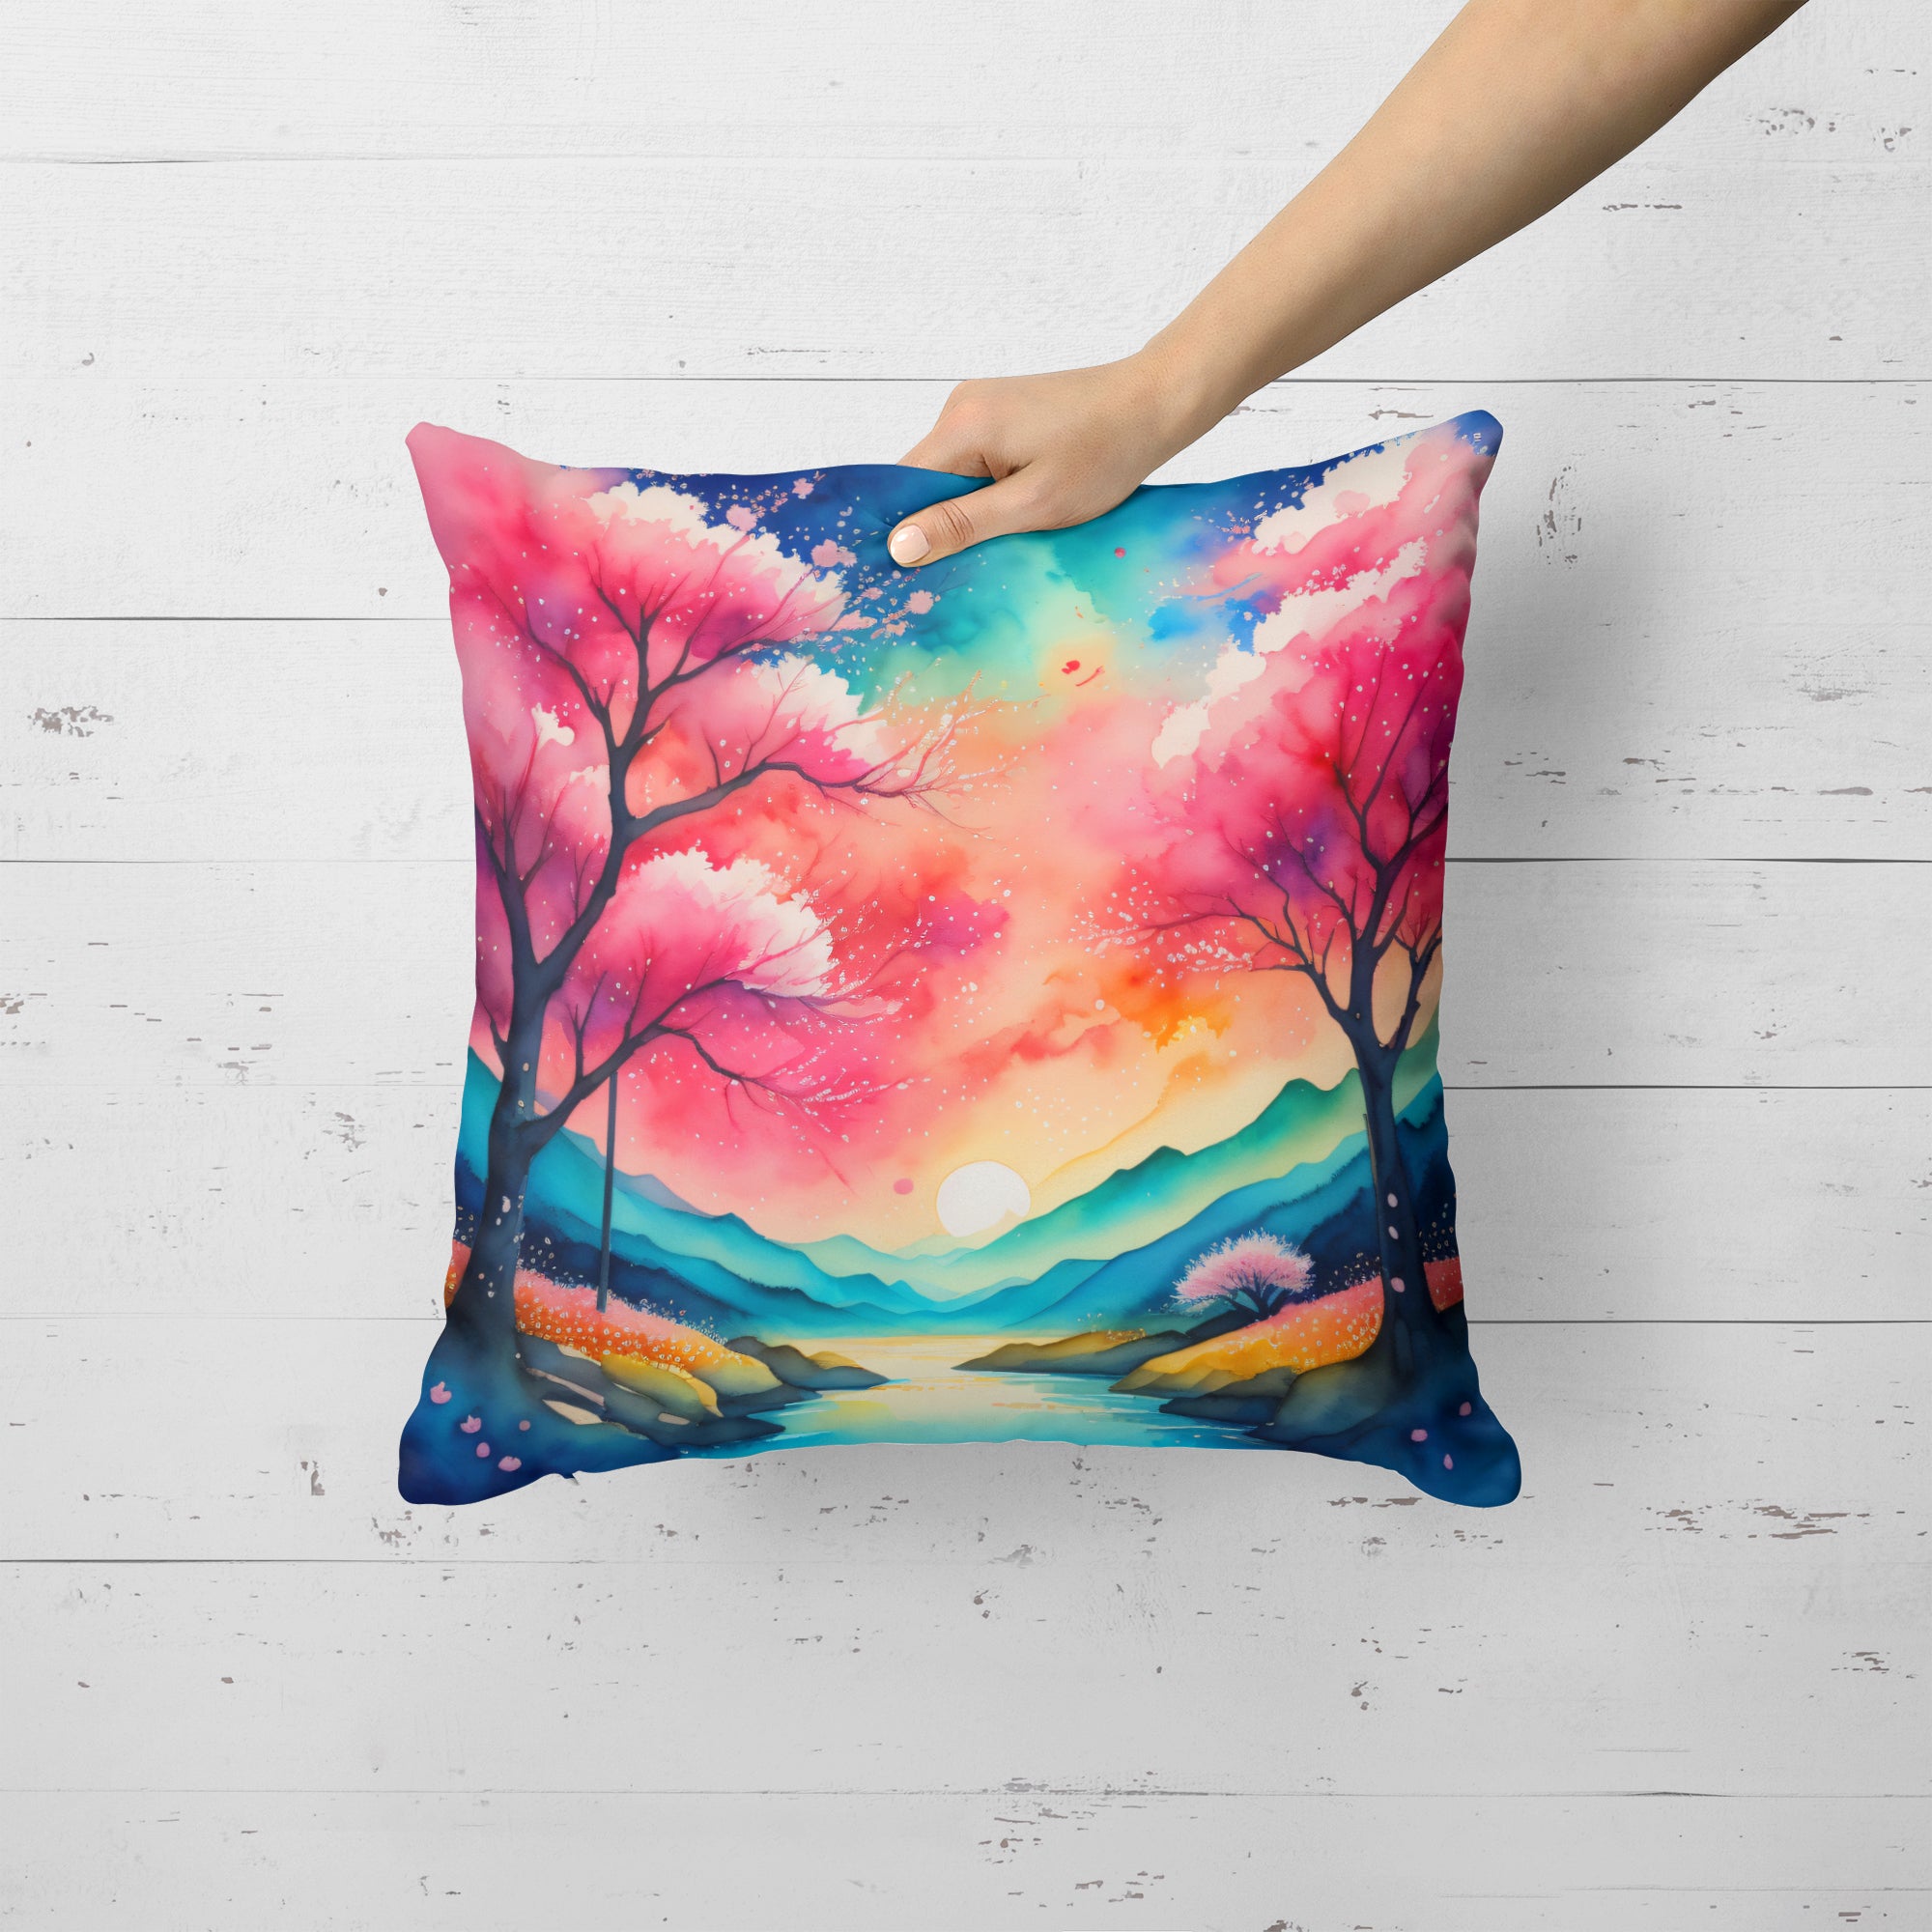 Buy this Colorful Cherry Blossoms Fabric Decorative Pillow